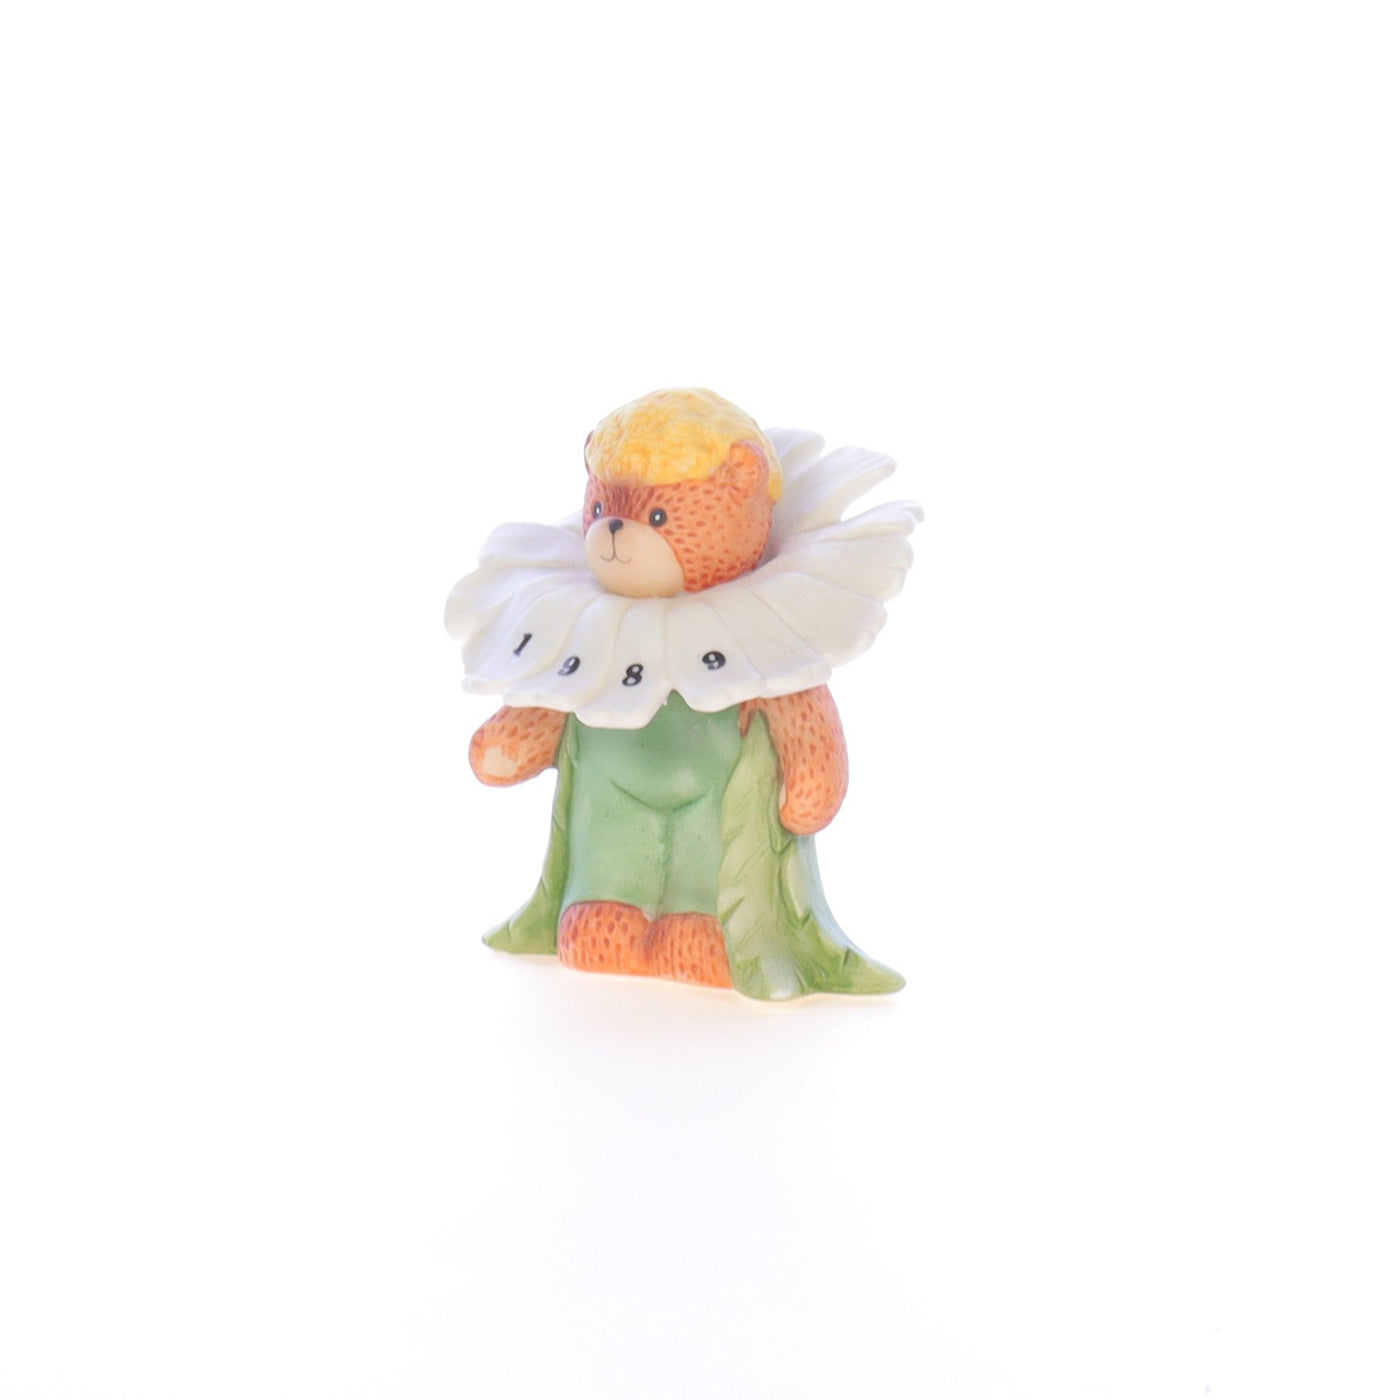 Lucy_And_Me_by_Lucy_Atwell_Porcelain_Figurine_1989_Flower_Petals_Lucy_Unknown_004_02